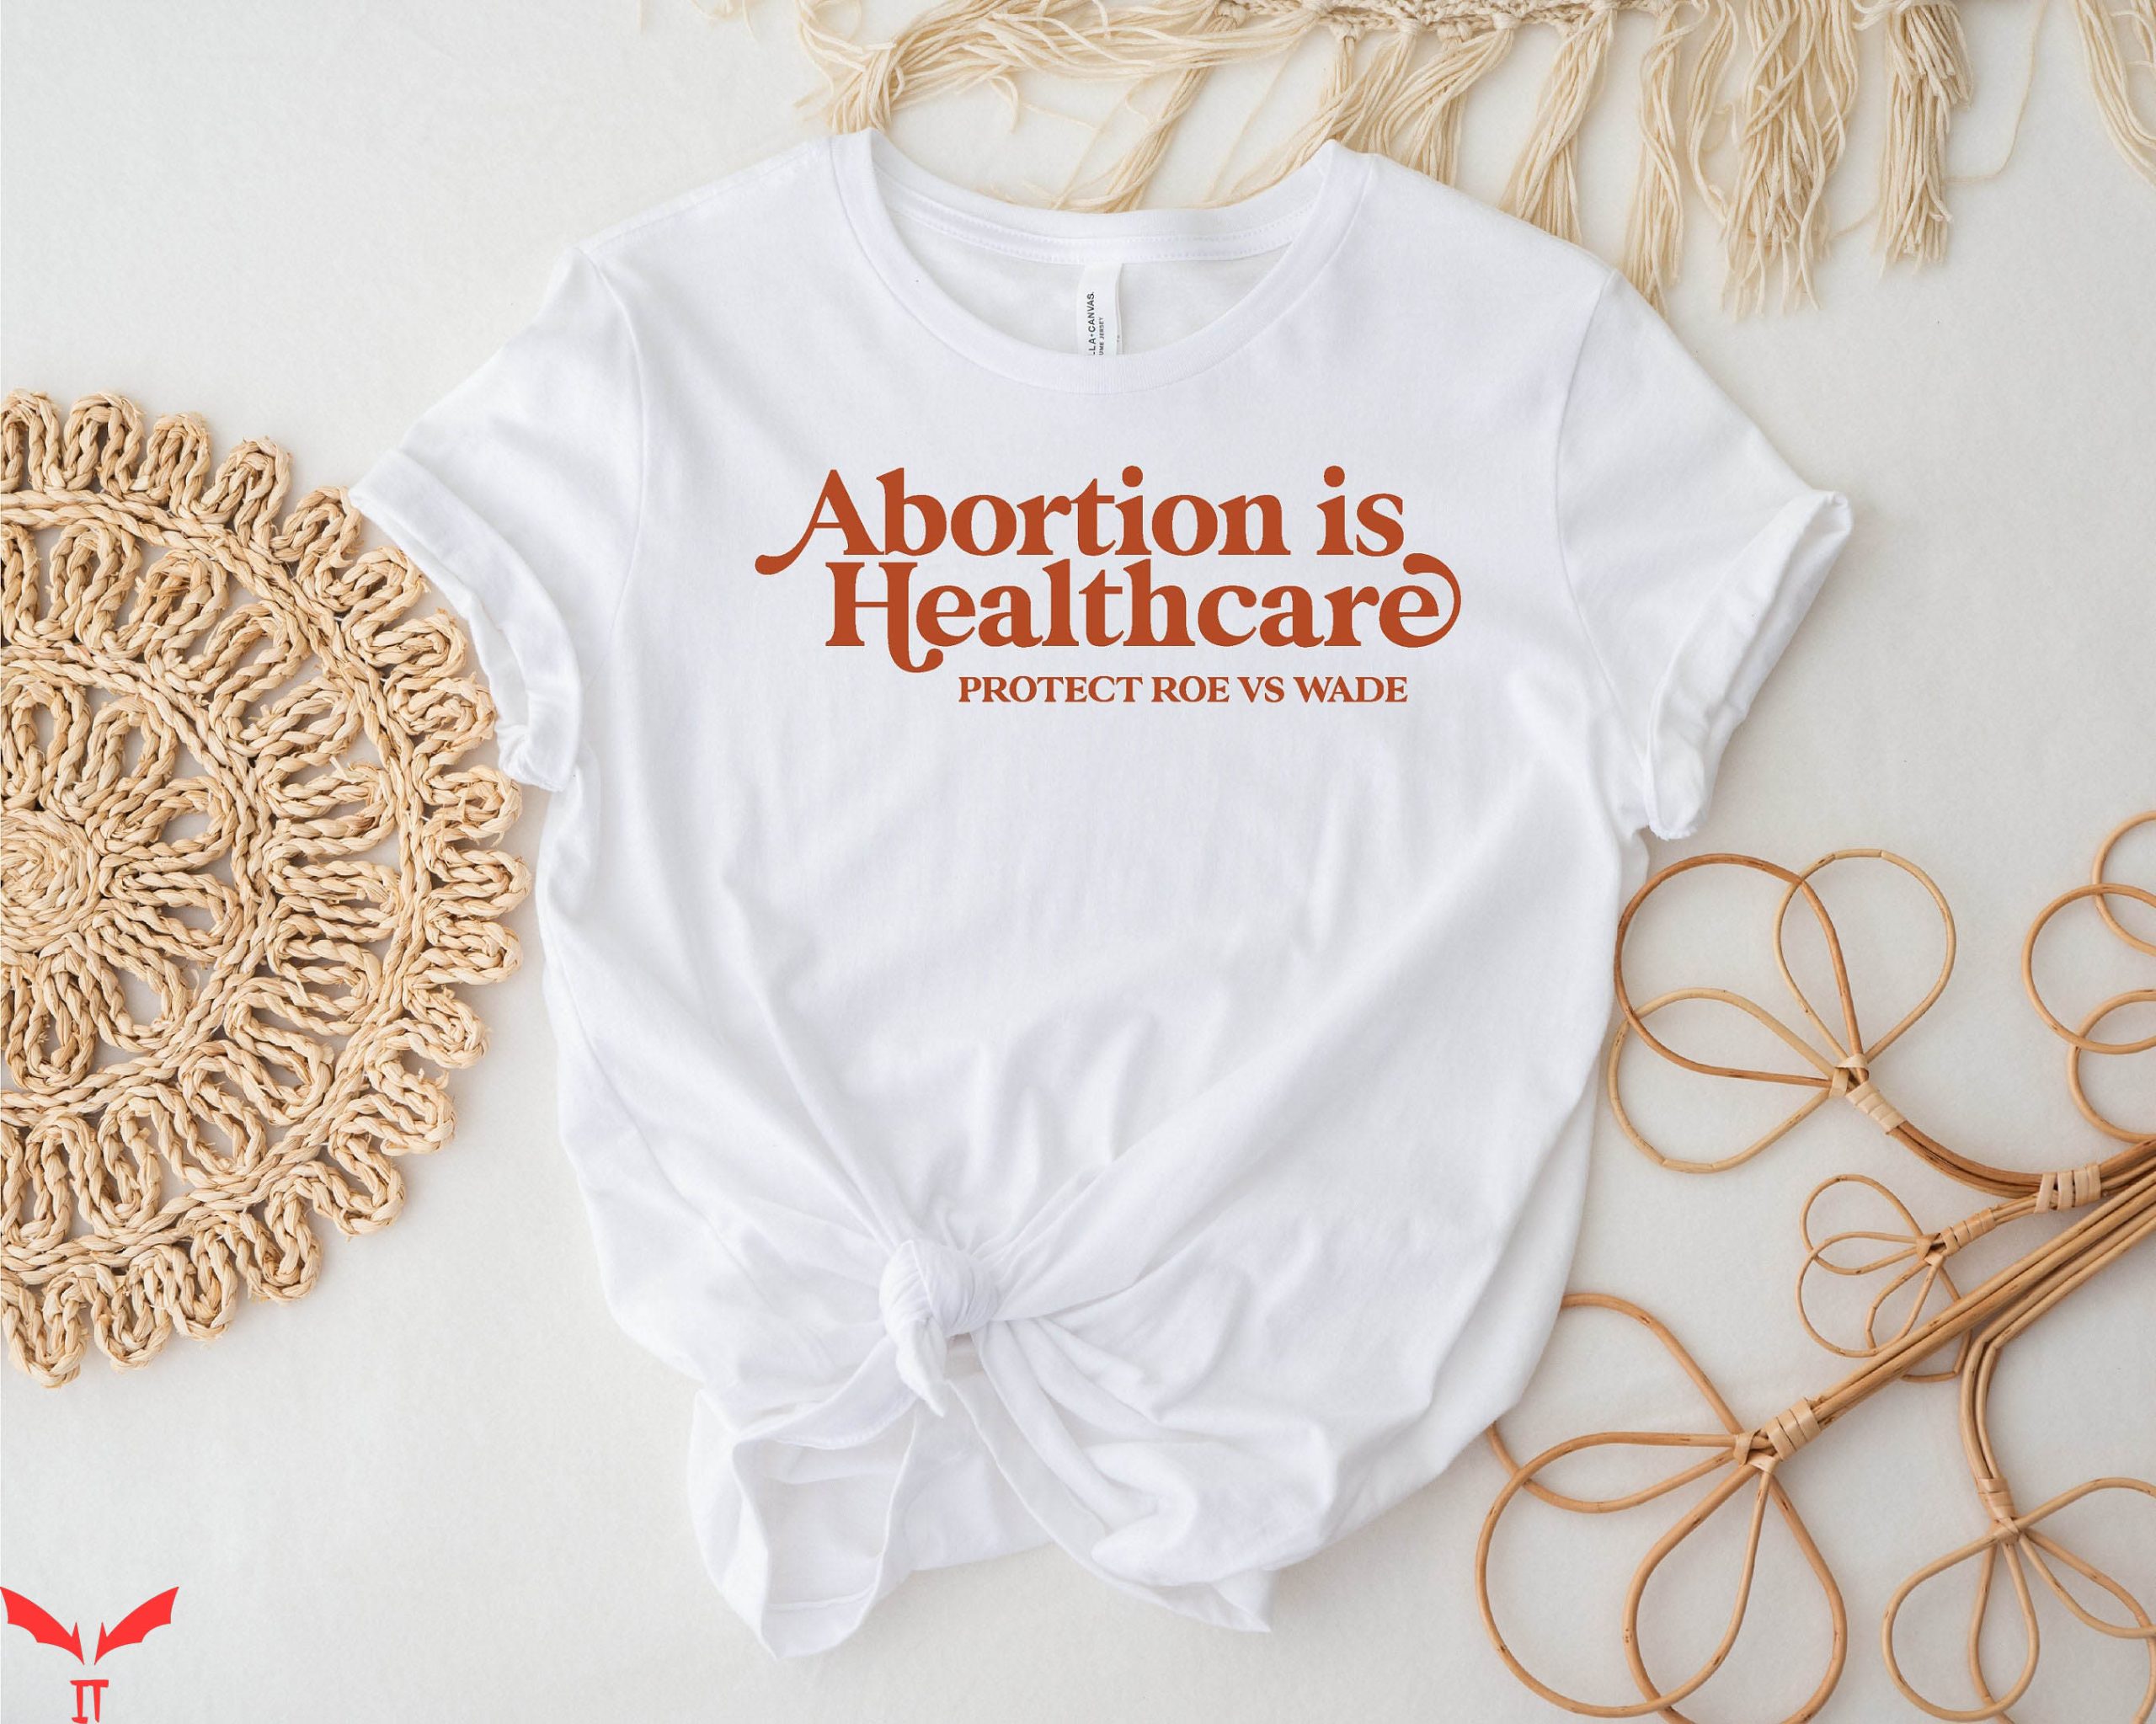 Pro Roe T-Shirt Retro Abortion Is Healthcare Protect Roe